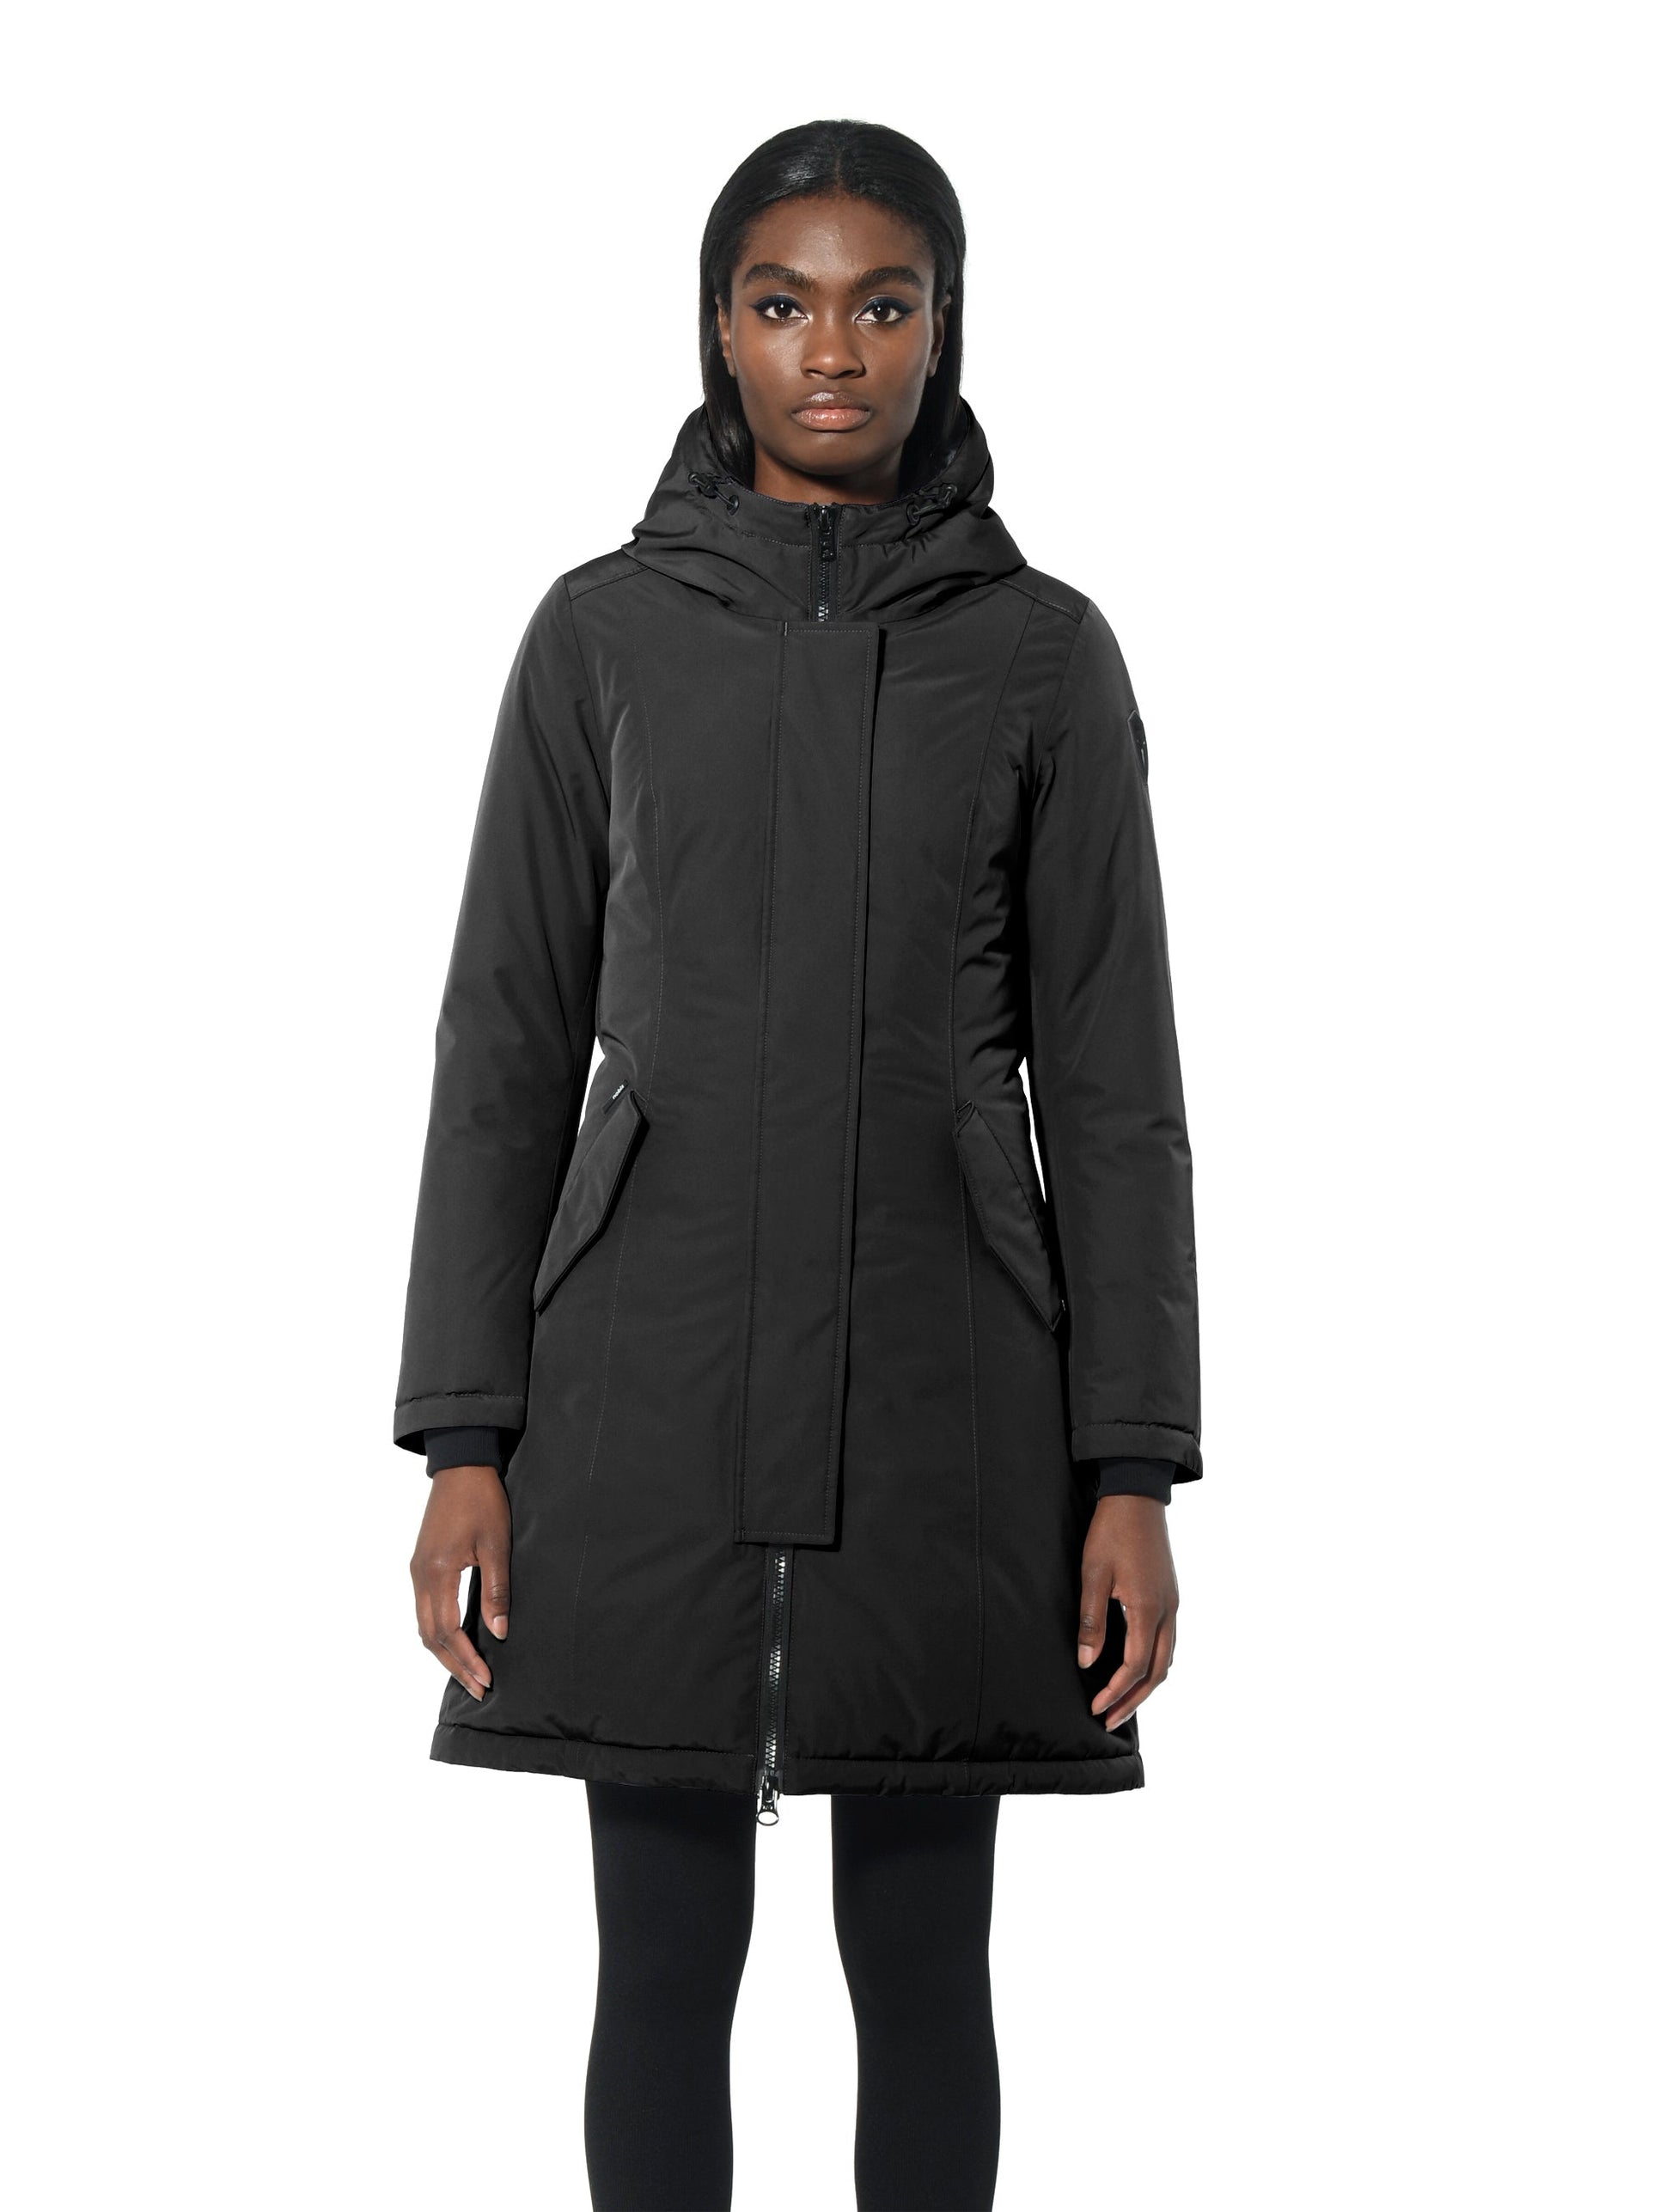 Ladies thigh length down-filled parka with non-removable hood in Black